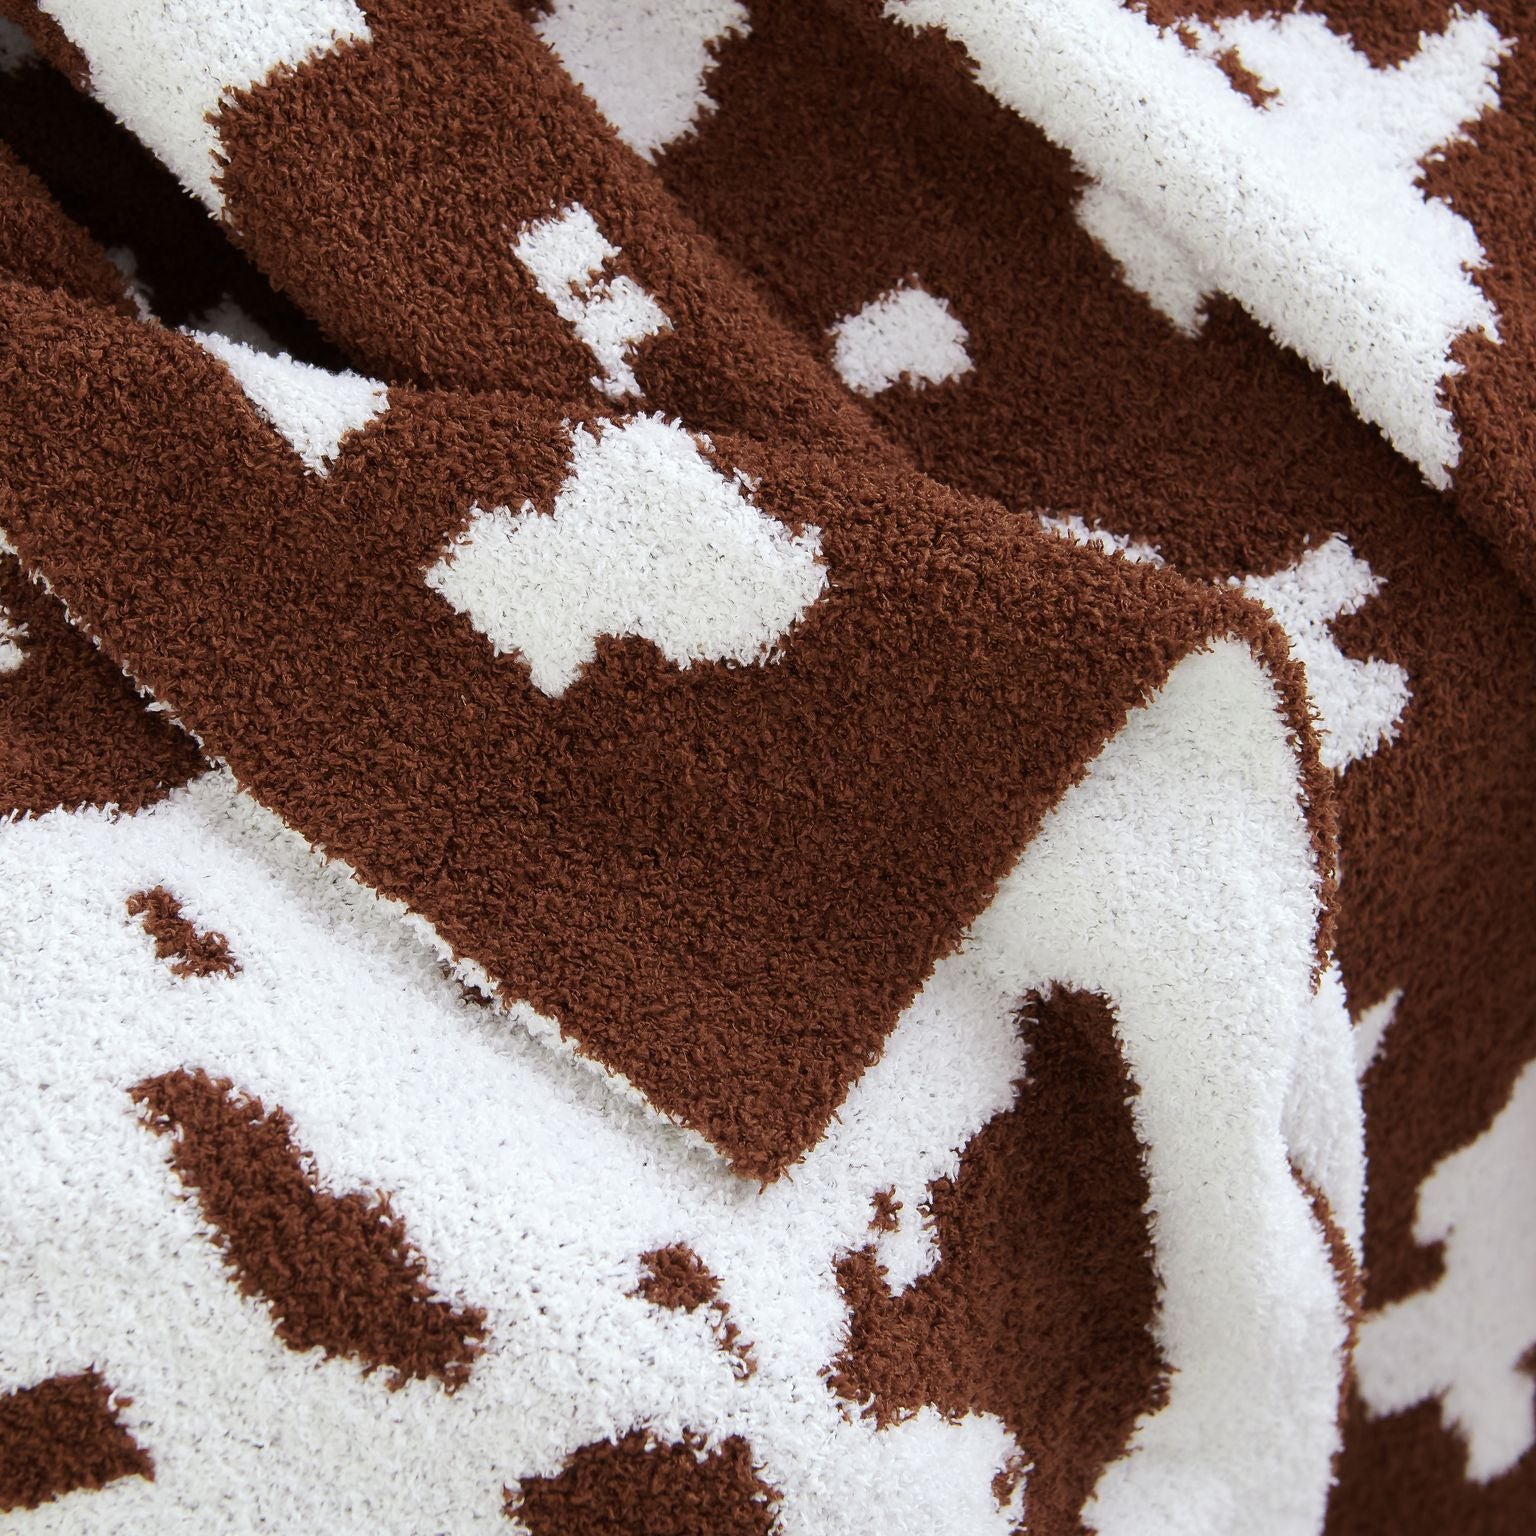 Jacquard Knit Throw Throw Blanket 50 x 60 inches Cow